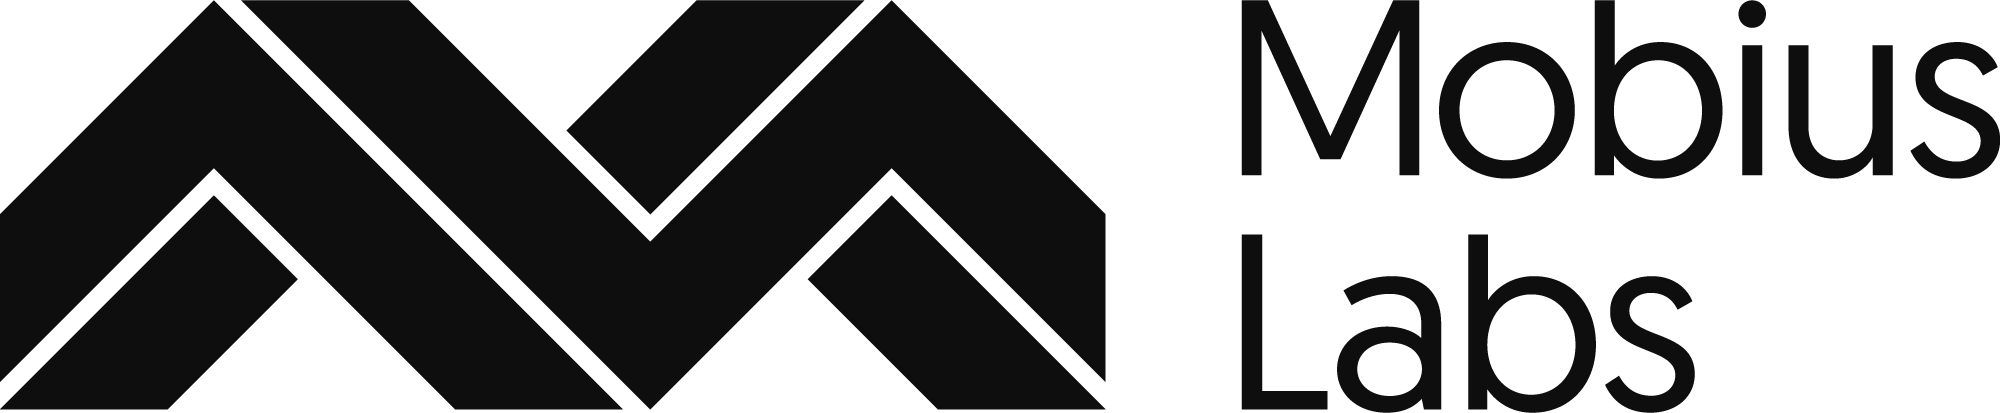 Mobius Labs  - logo and text -  black.png